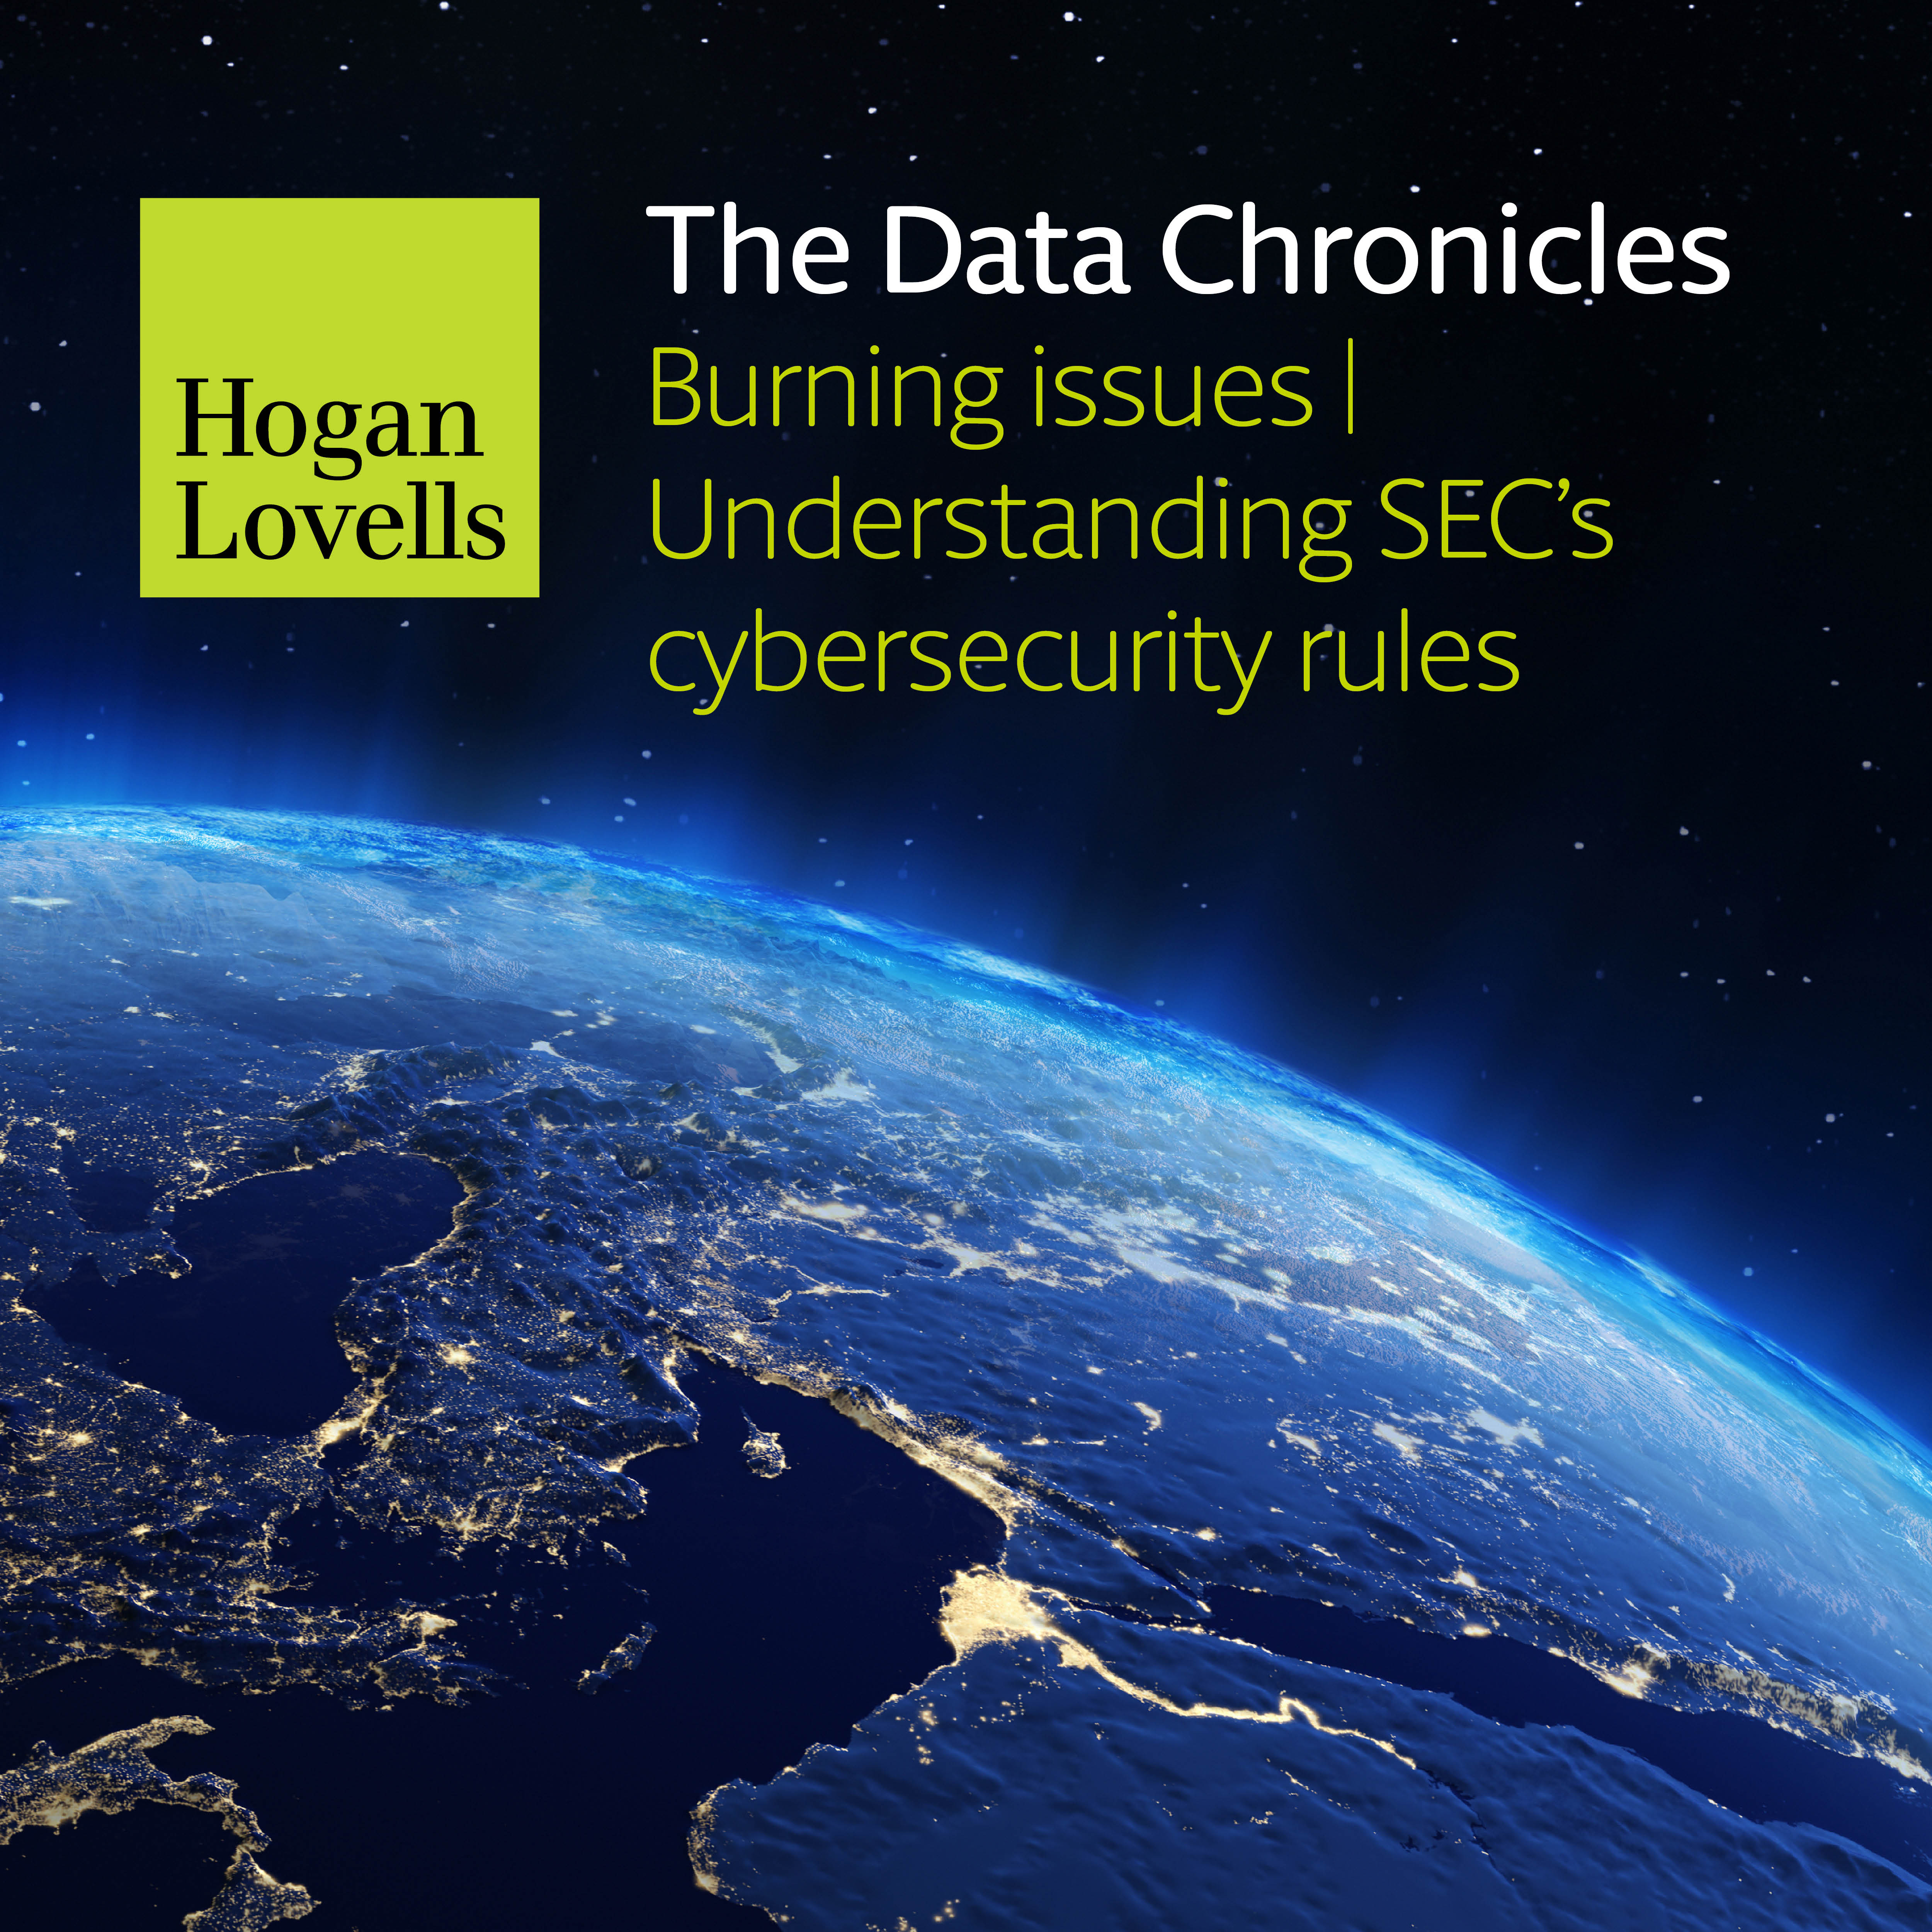 The Data Chronicles_SEC cyber rules